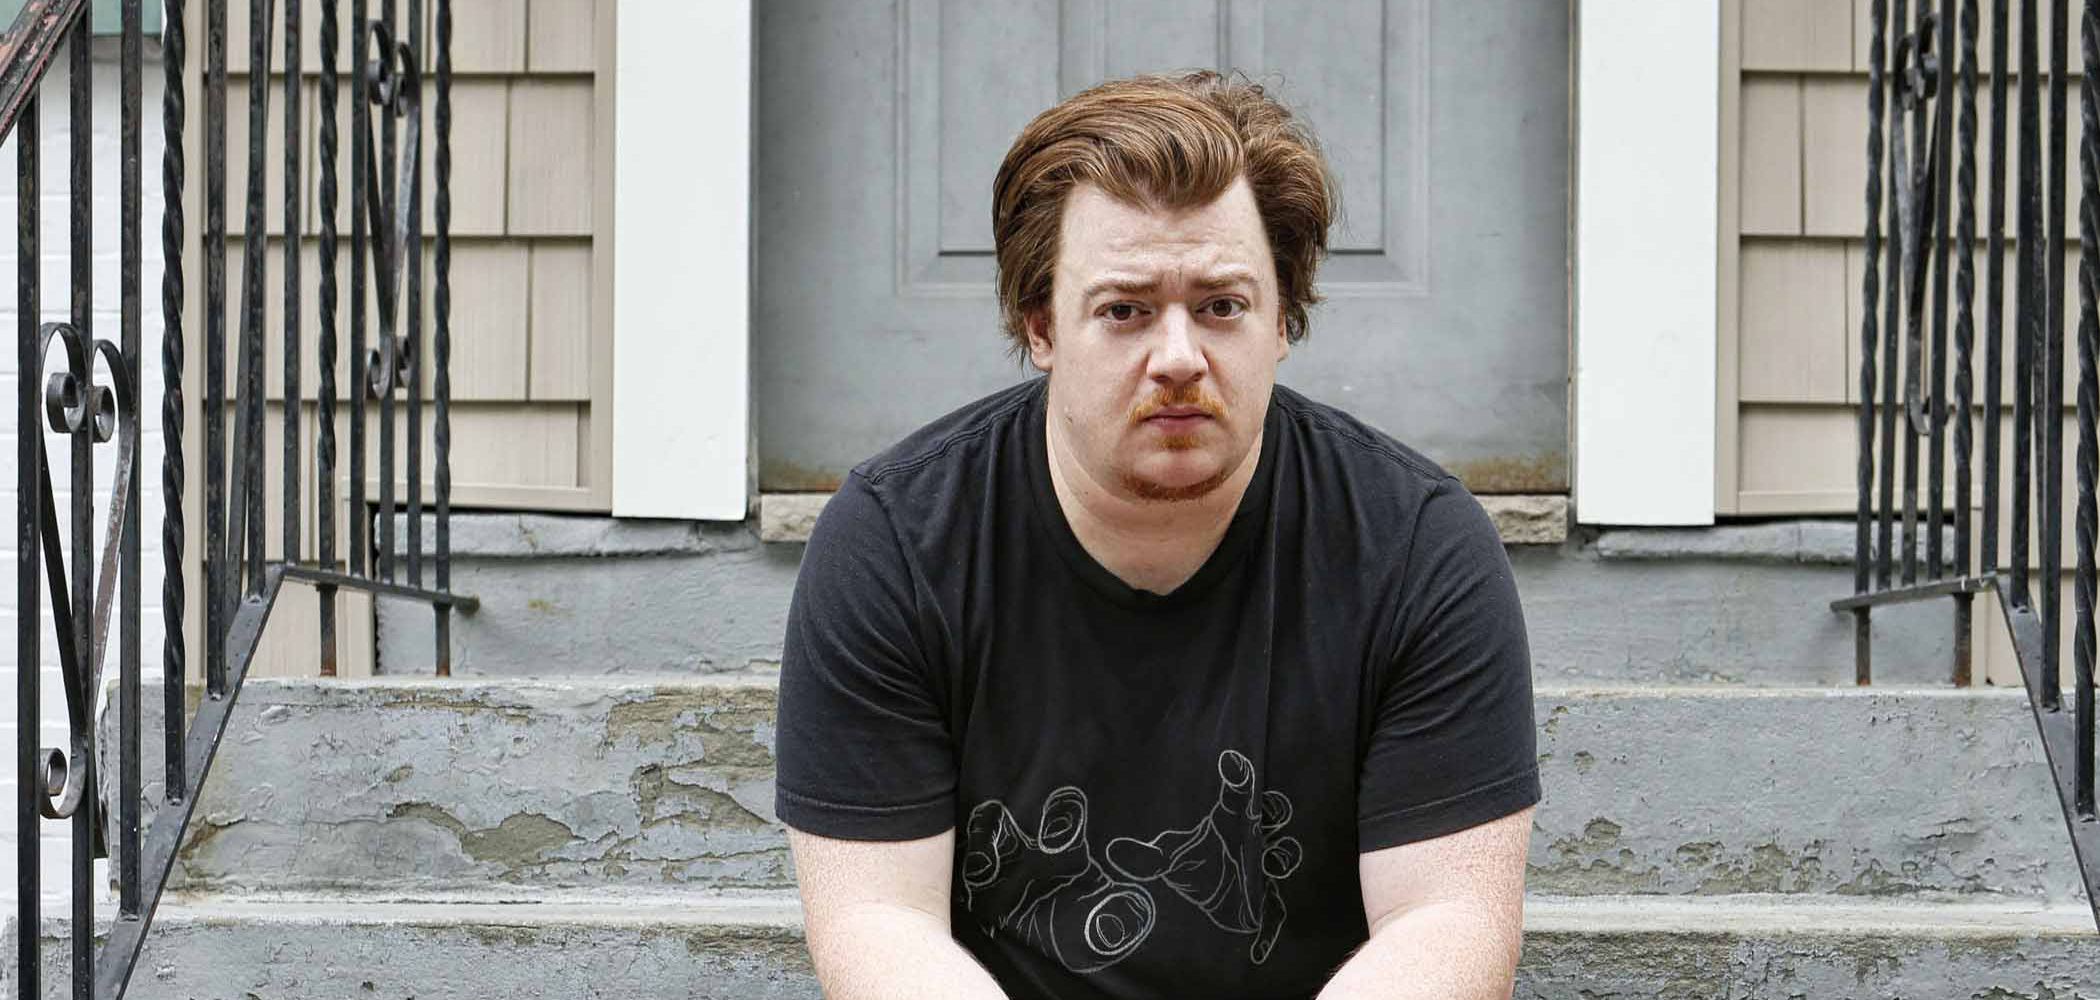 Who's Danny Tamberelli dating? Bio: Net Worth, Now, Married,